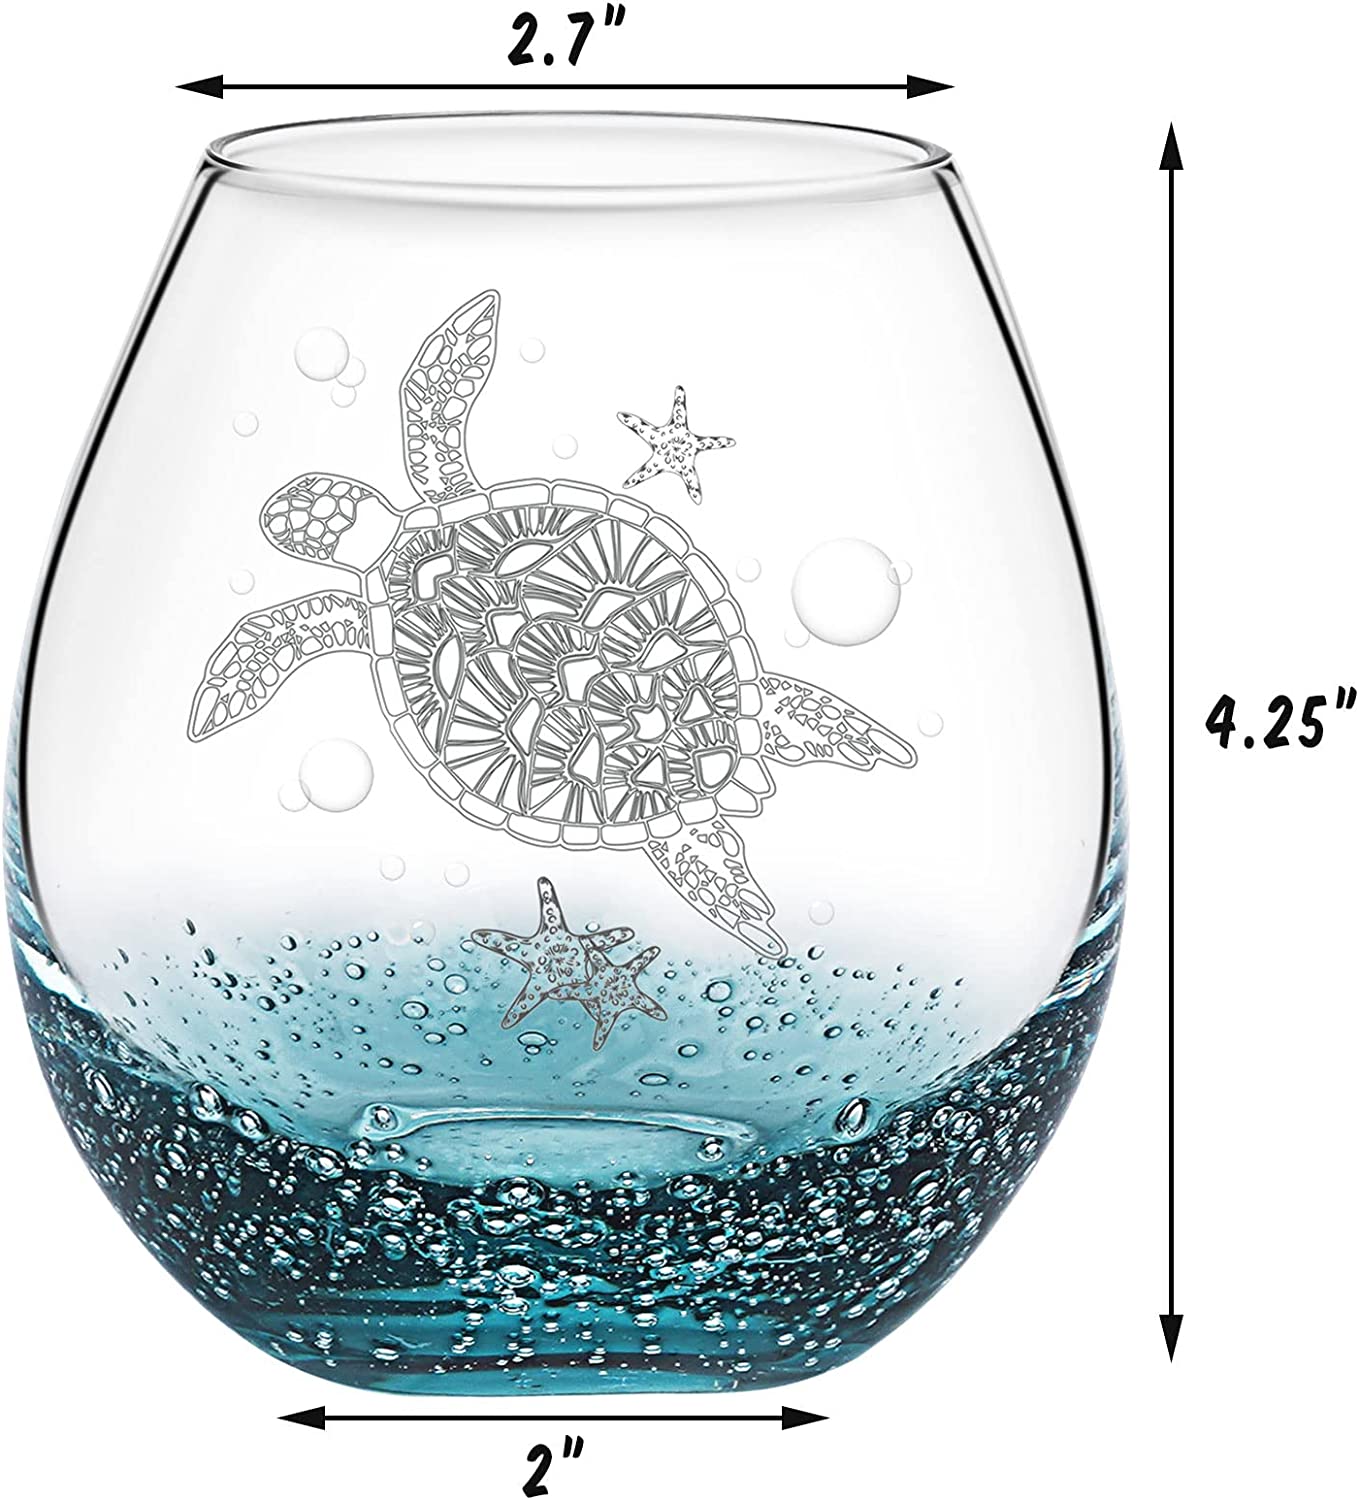 Sea Turtle Stemless Wine Glass for Women, Christmas Gifts for Turtle Lovers, Ocean Birthday Gifts for Beach Party Man Friends